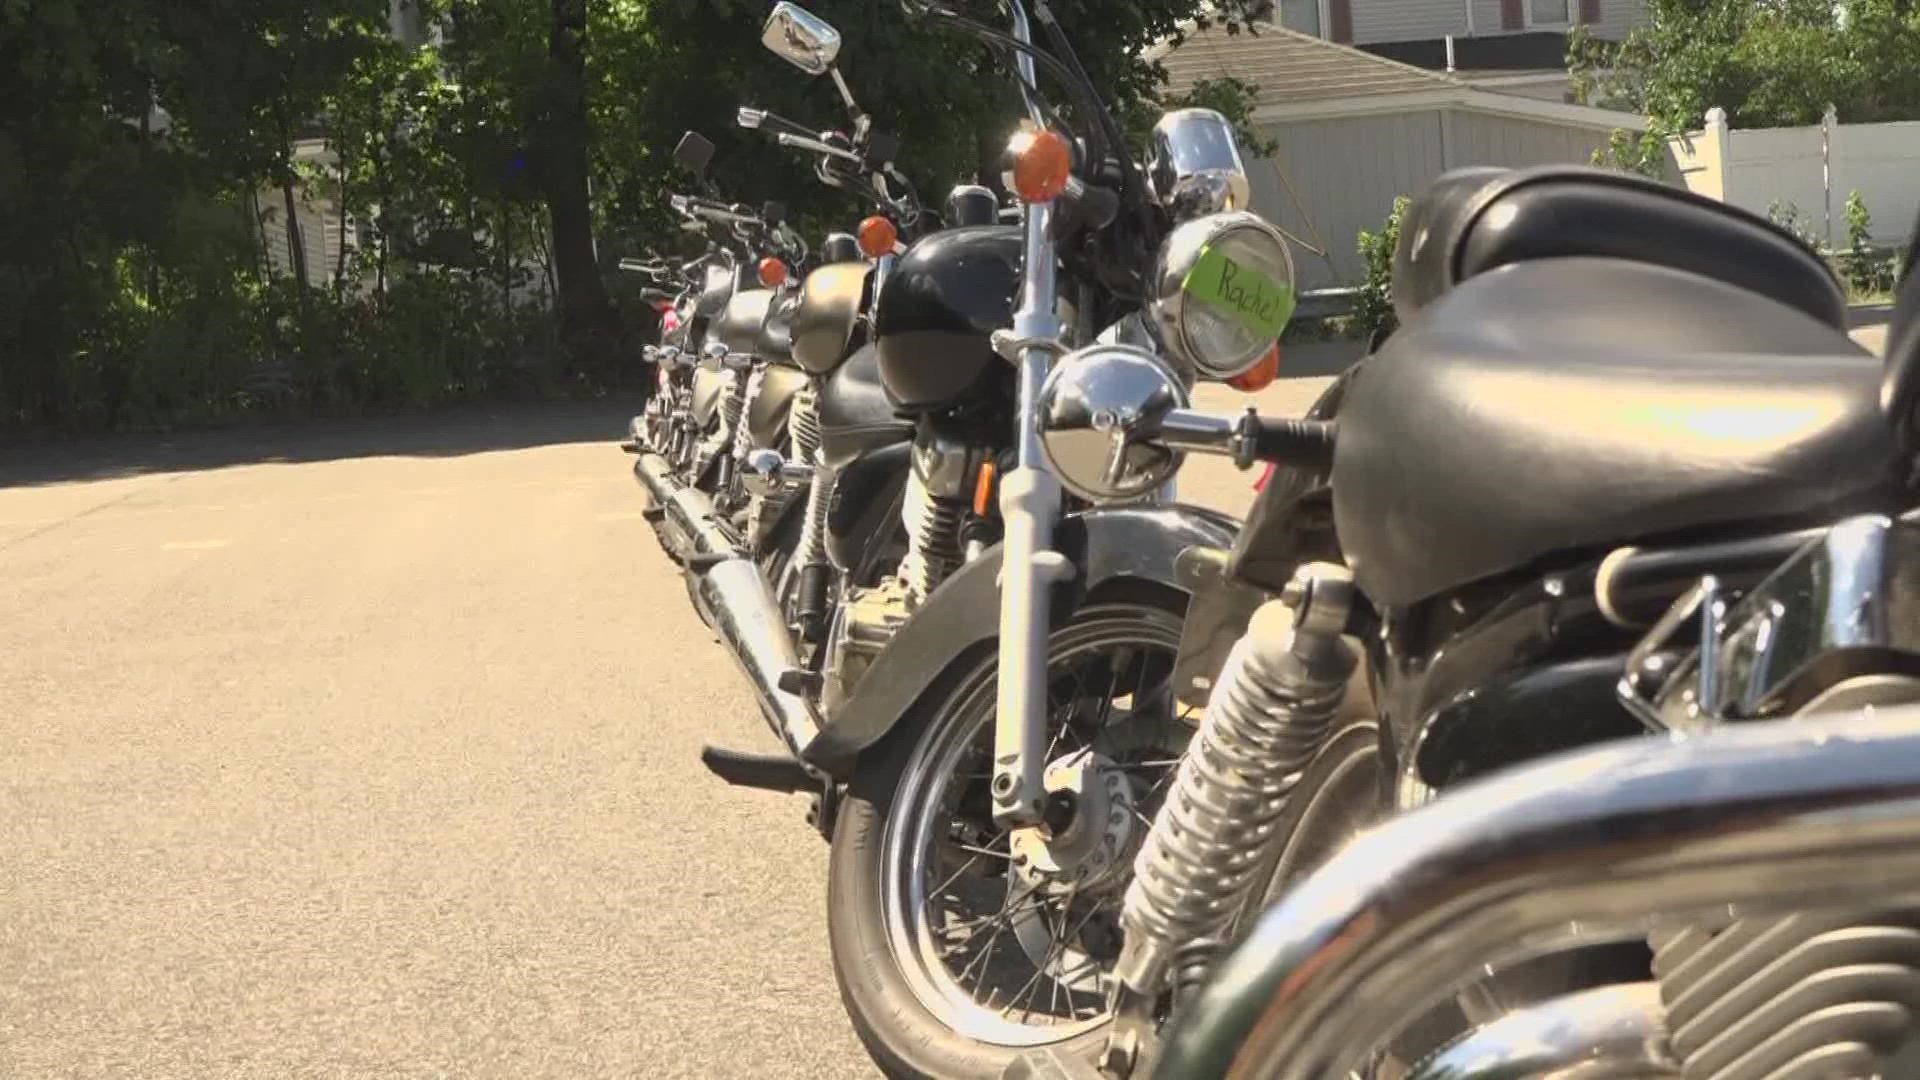 The first eight months of 2022 saw 25 fatalities involving motorcyclists, while the entirety of 2021 saw 22, according to the Maine Department of Transportation.